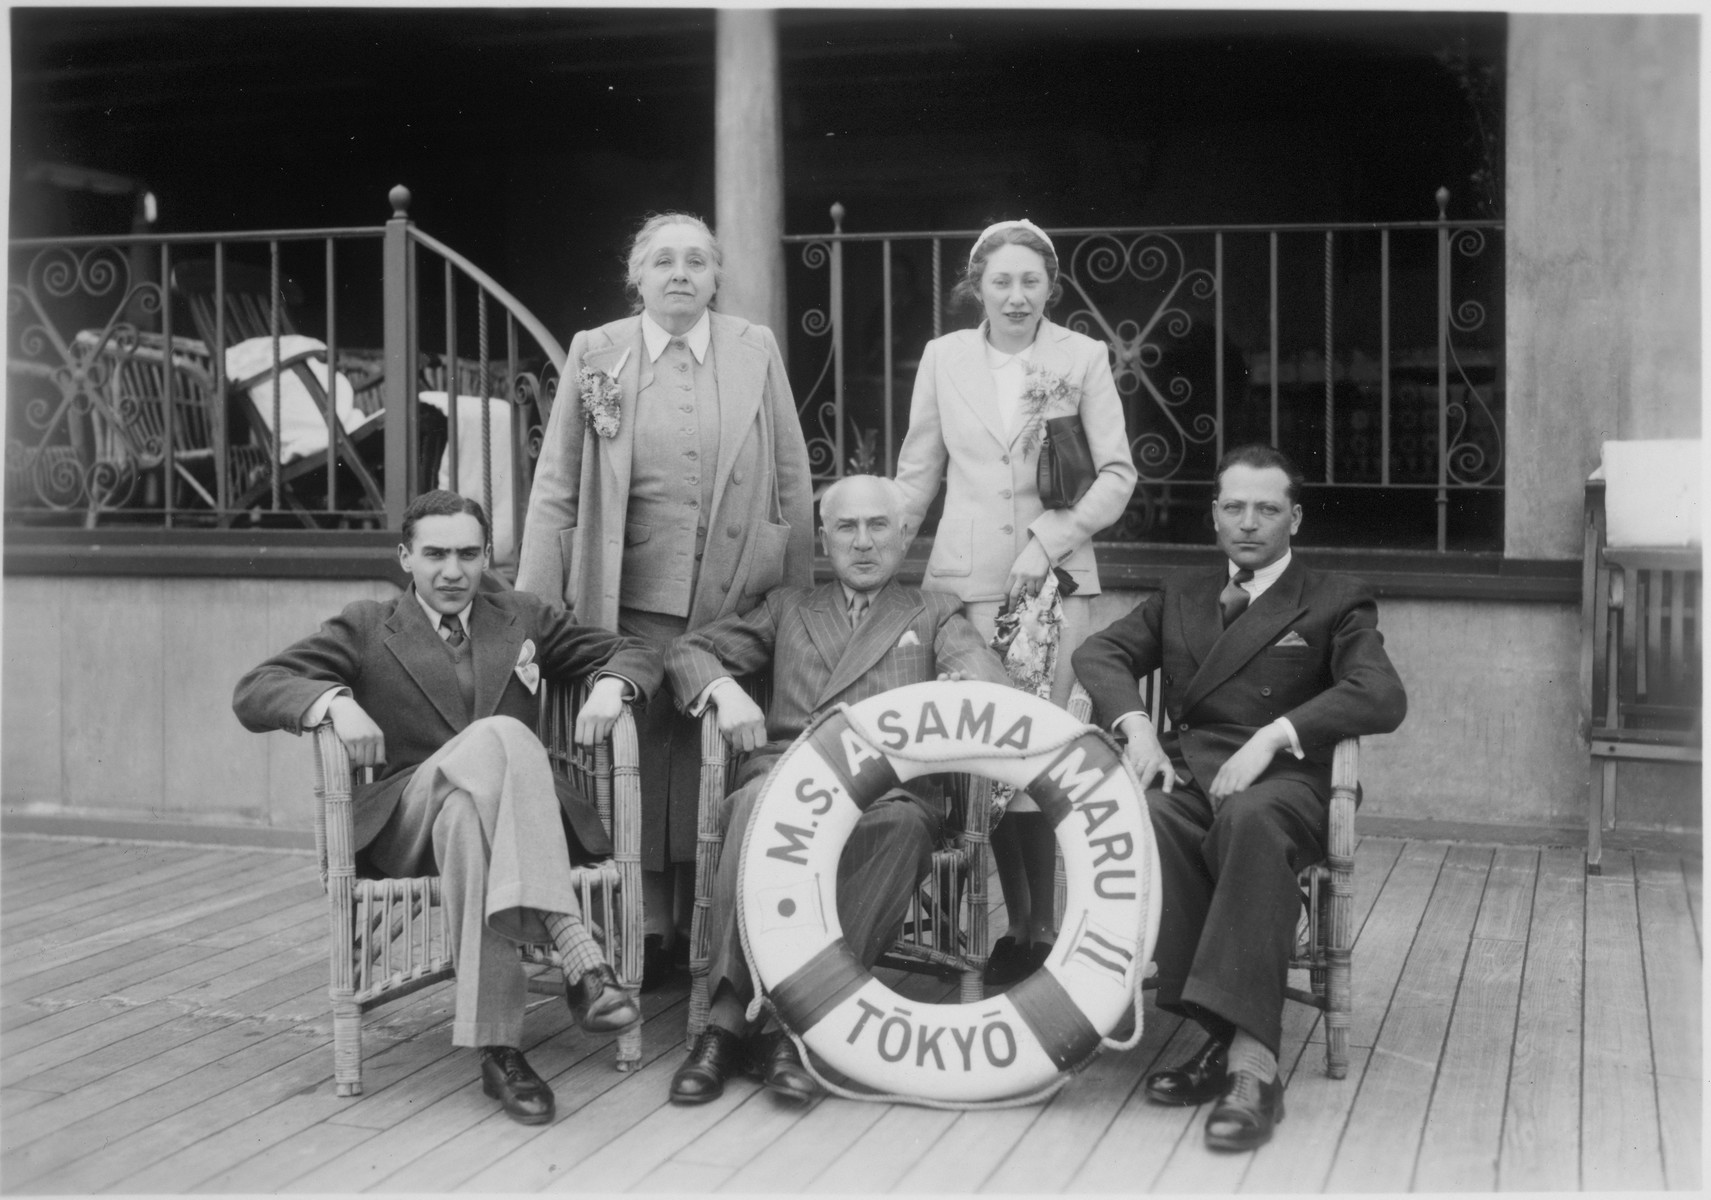 A group of Jewish refugees gather on the deck of the Asama Maru en toute from Japan to Canada.

Pictured in the front row, from left to right: Bronislaw and Zelik Honigberg, and Salomon Fishaut.   In the back row, from left to right: Maryla Honigberg and Paulina (Honigberg) Fishaut.